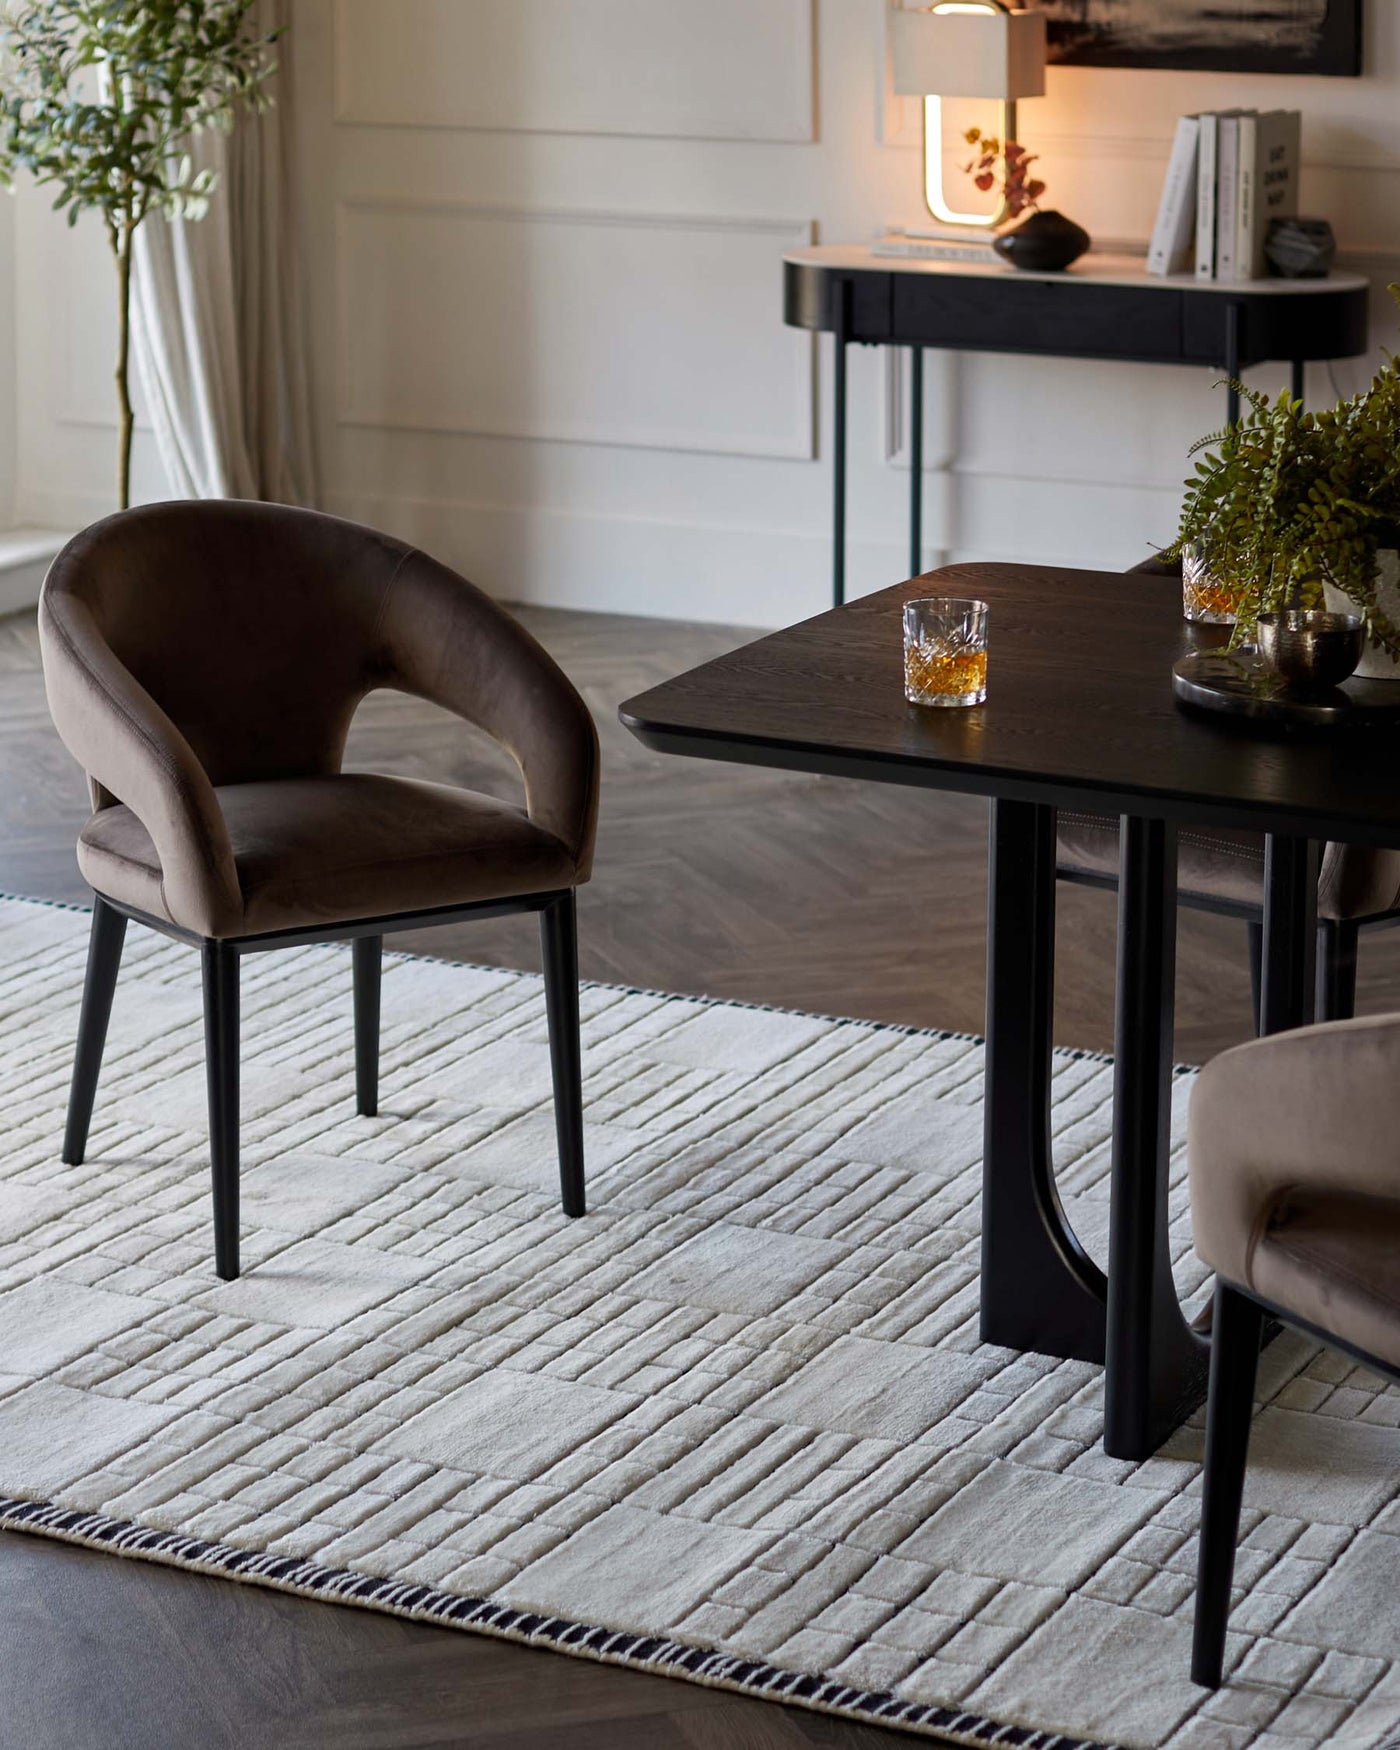 A contemporary dining room featuring a sleek, dark wood rectangular table with black metal legs, complemented by plush, curved velvet dining chairs in a muted taupe colour also with black legs. The arrangement sits atop a textured off-white rug with geometric lines and a black border, creating a sophisticated and modern space. A minimalist console table with decor items is partially visible in the background.